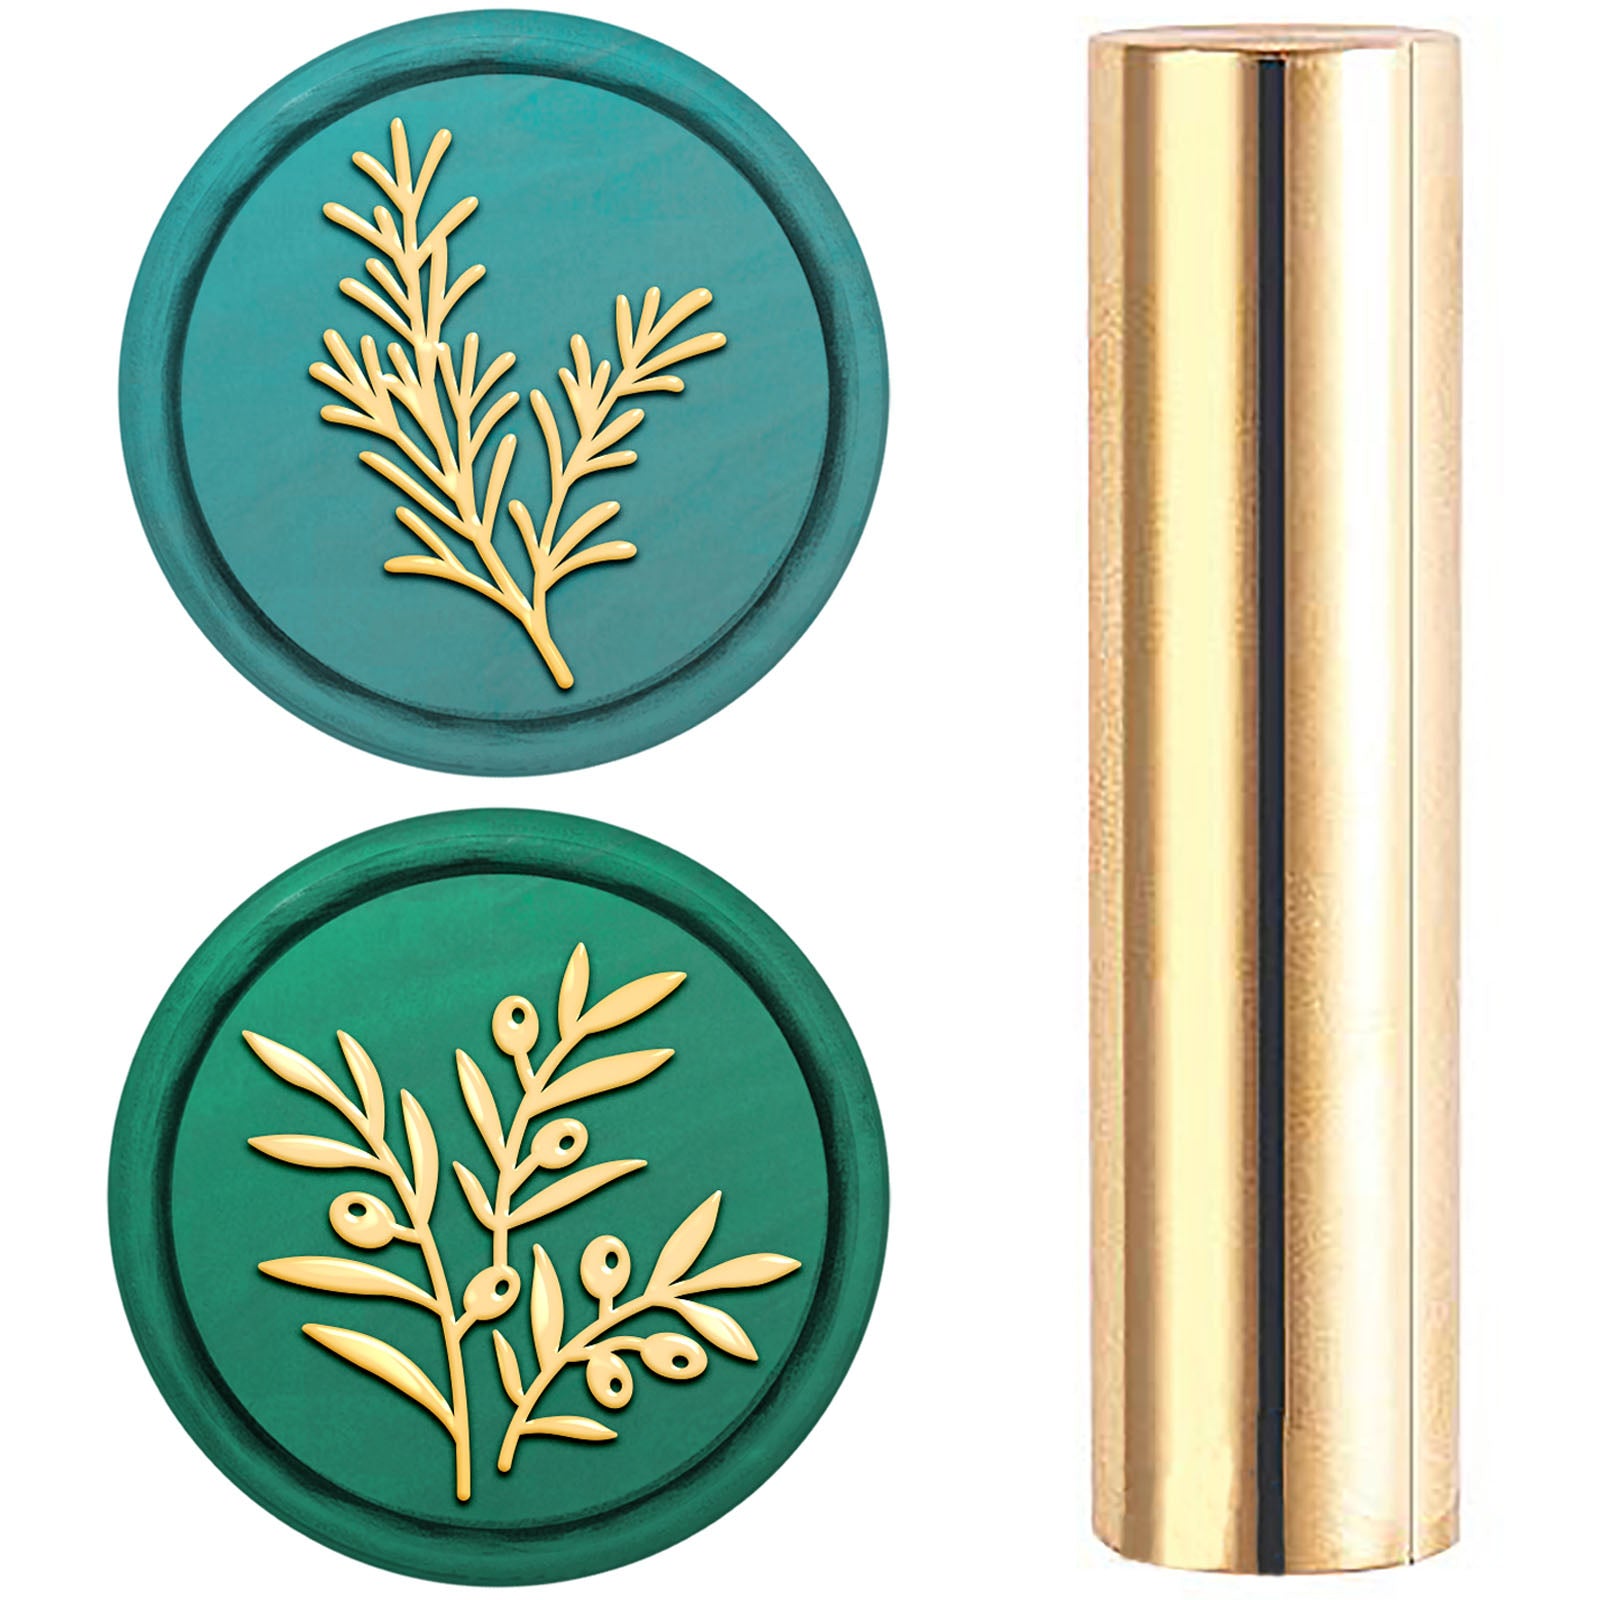 15mm 2 Sides Mini Brass Sealing Stamp (olive leaf + rosemary)